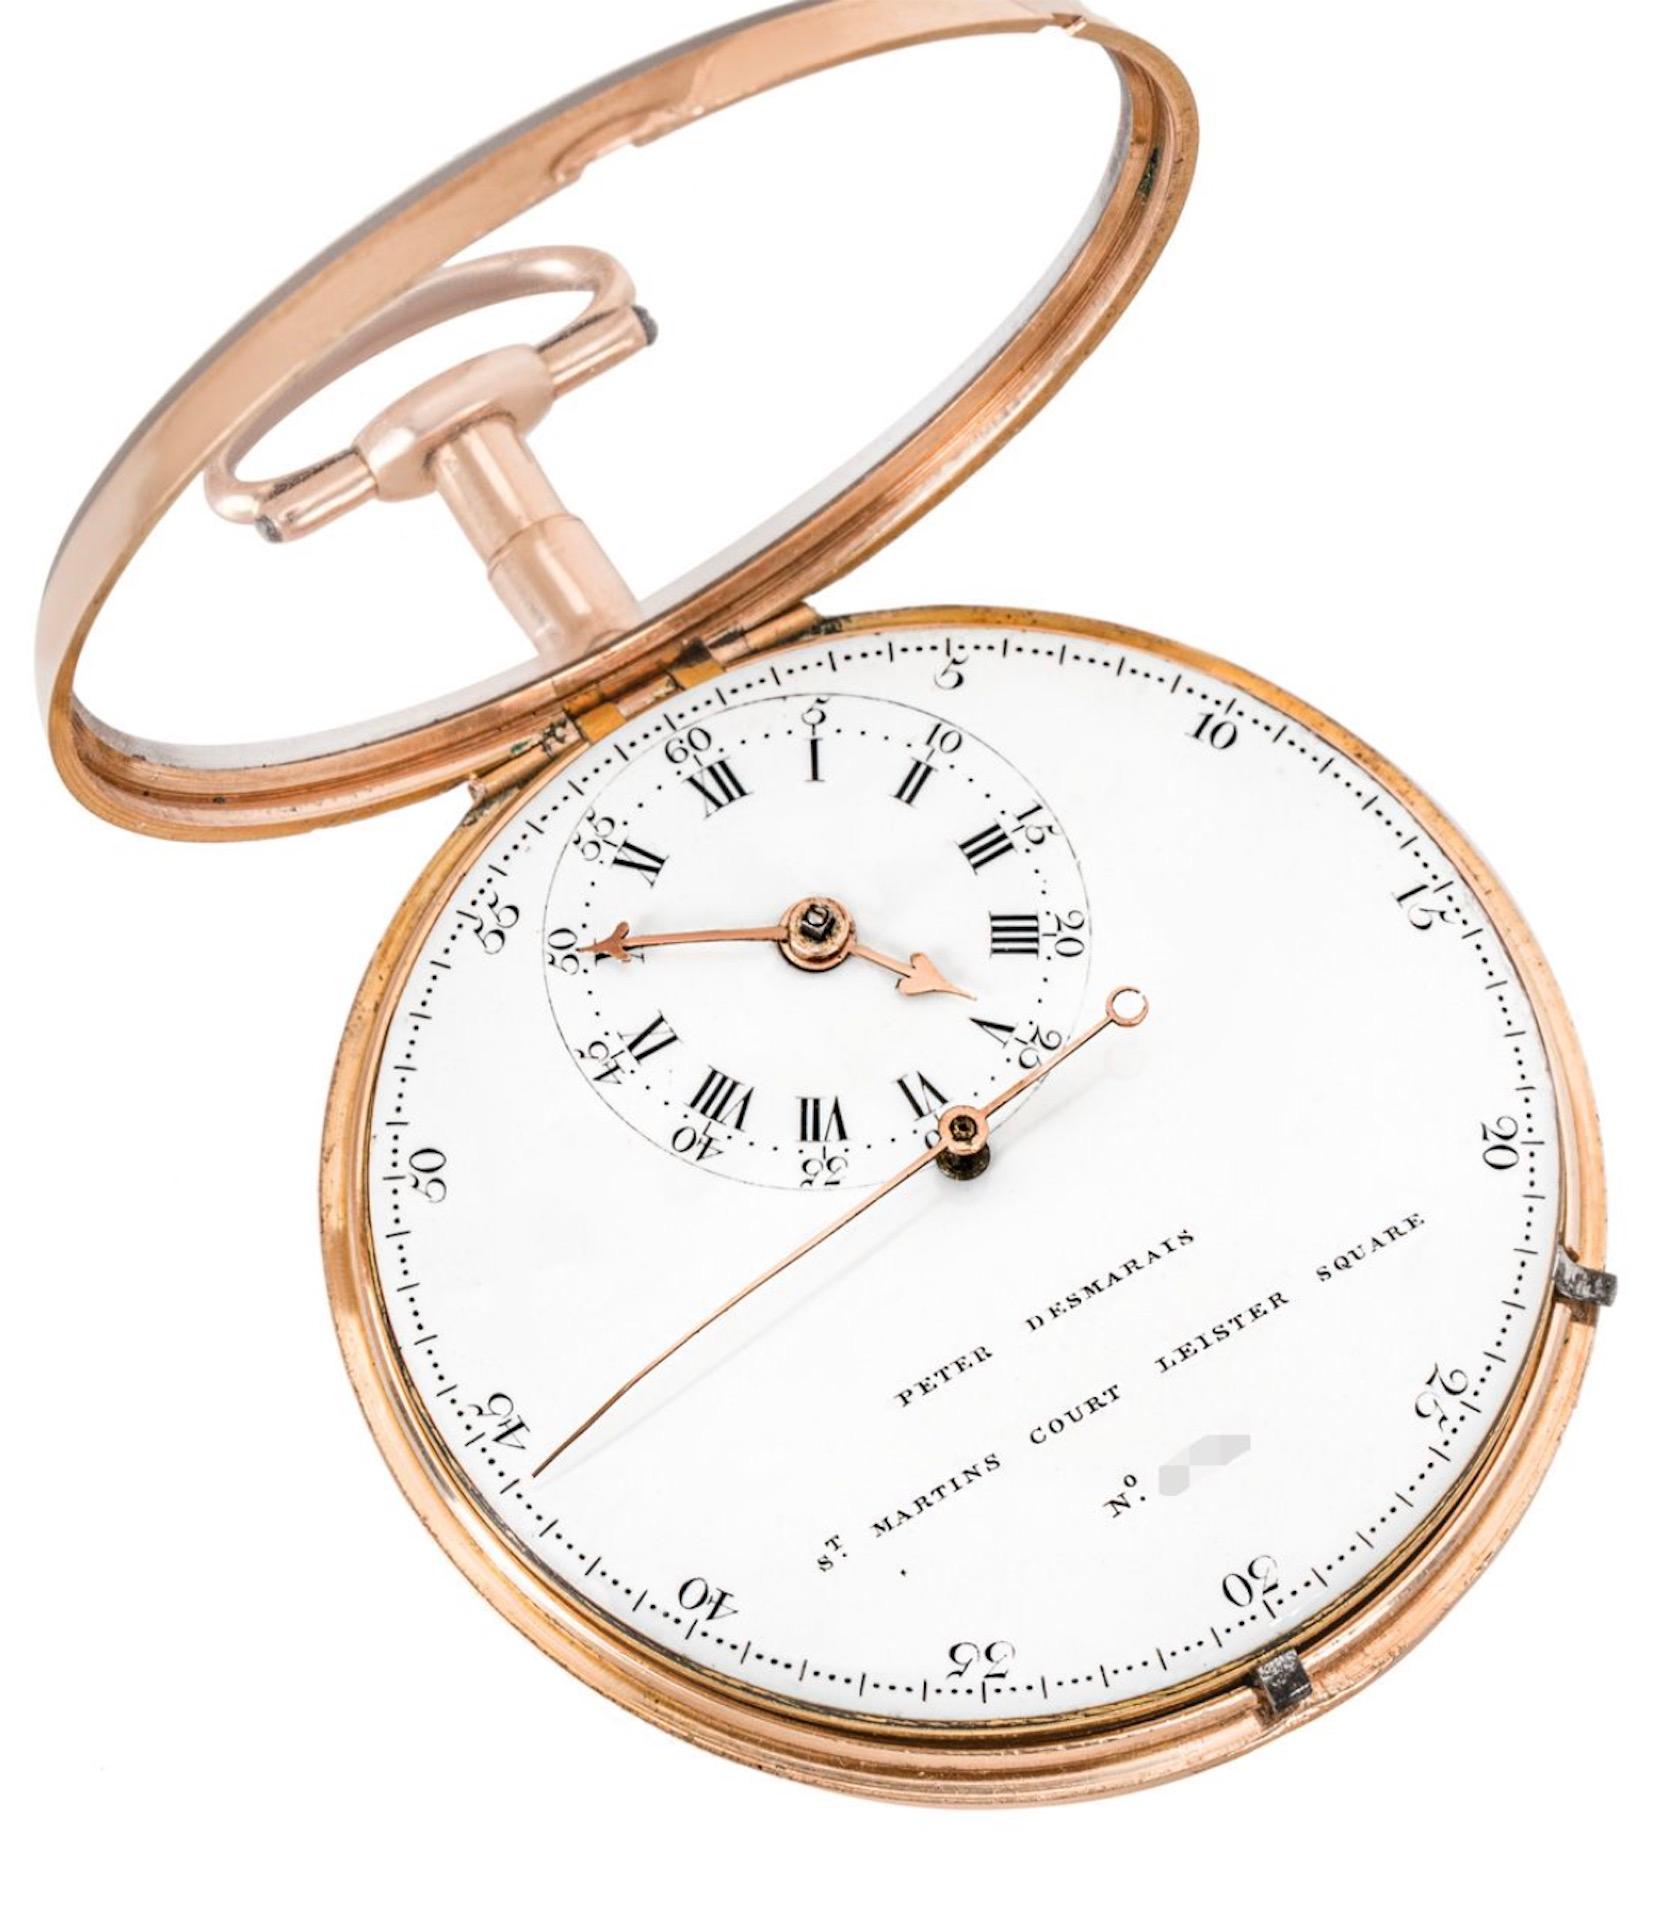 Peter Desmarais, St Martins Court, Leister Square. An 18K rose gold pair case, key wind cylinder pocket watch, London, C1803.

Dial: A beautiful original fully signed and numbered white enamel dial, with offset Roman numeral hour markers, black